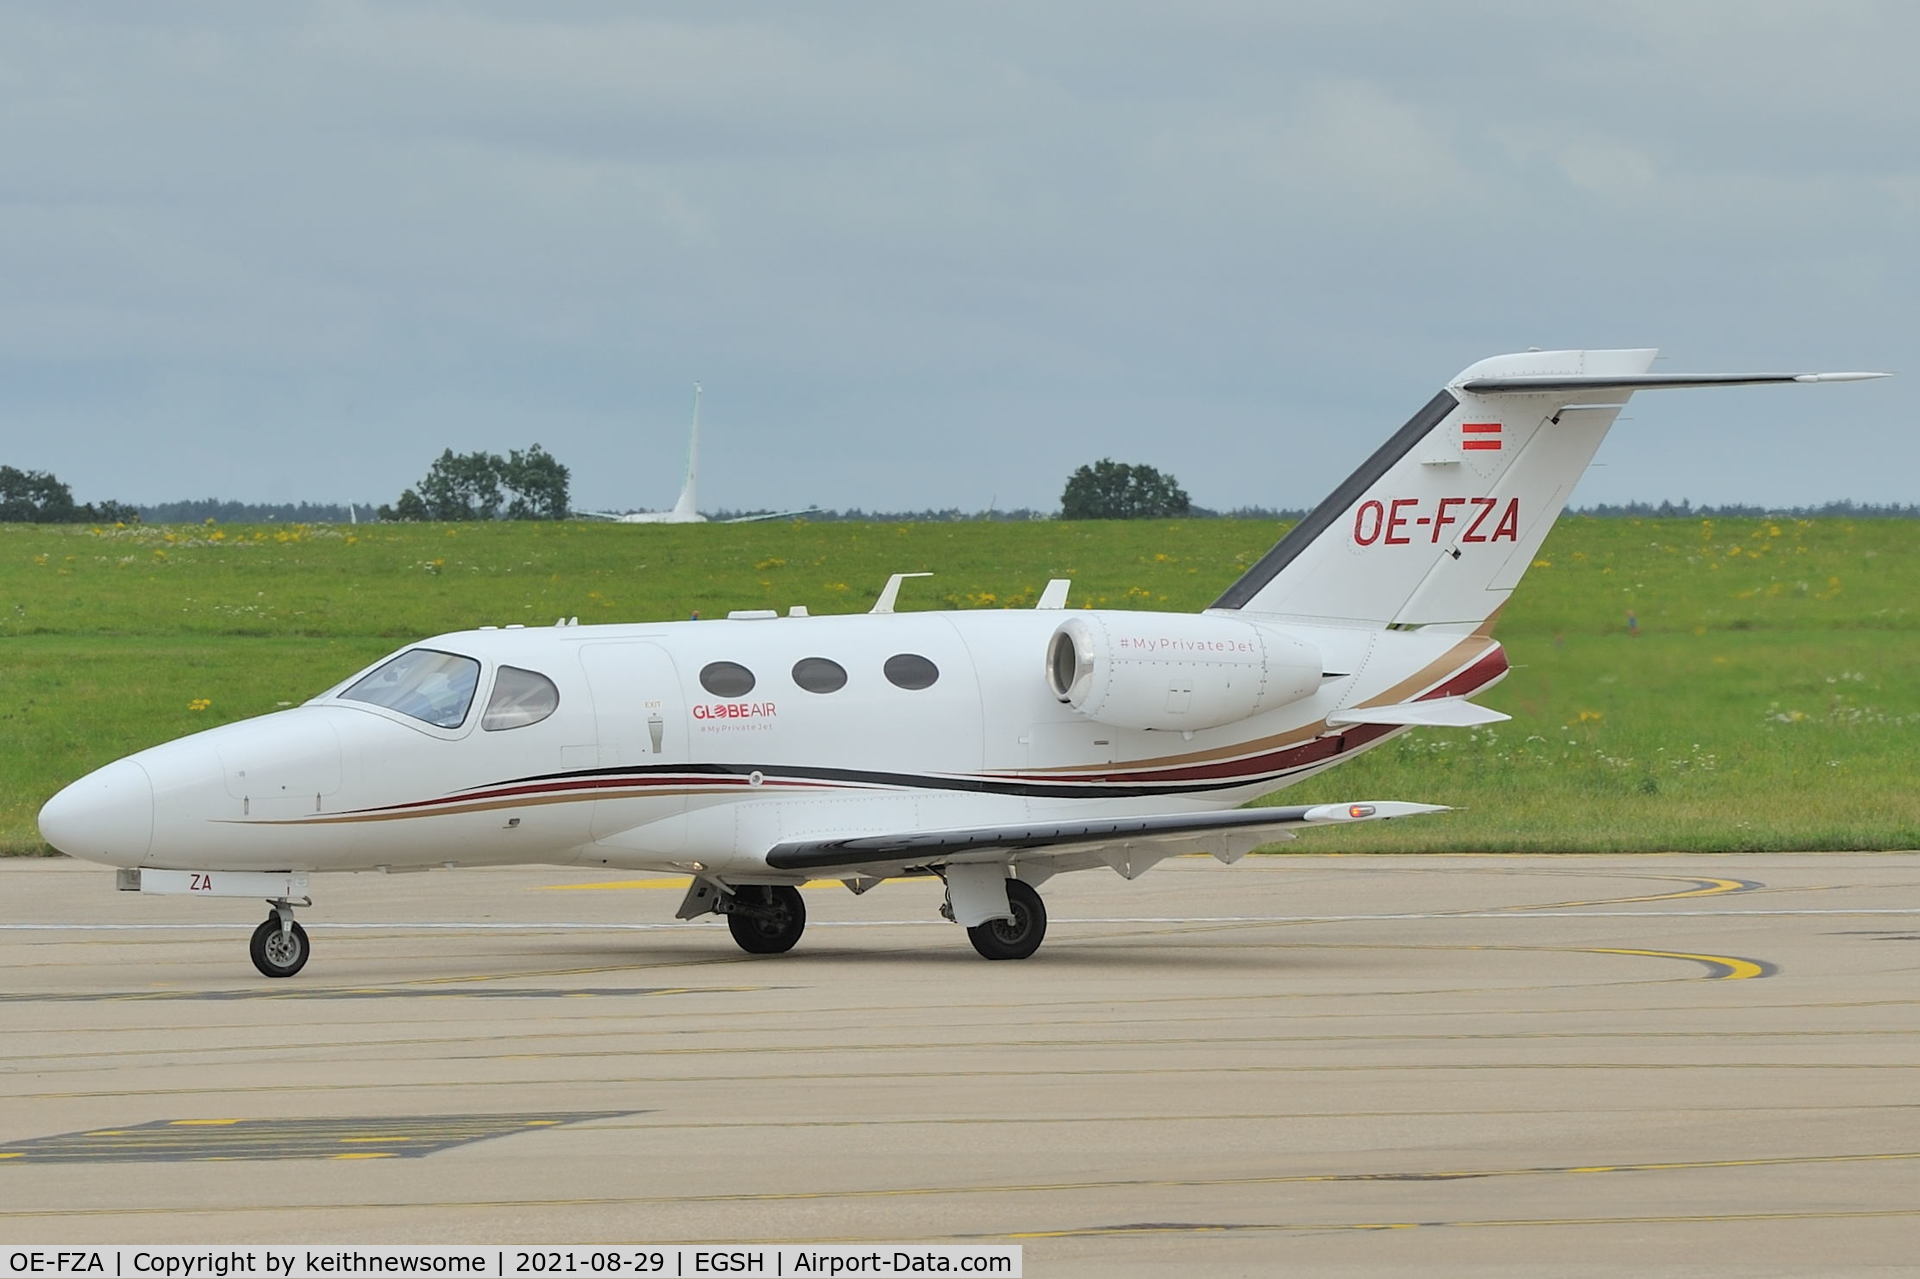 OE-FZA, 2008 Cessna 510 Citation Mustang Citation Mustang C/N 510-0144, Arriving at Norwich from Paderborn.